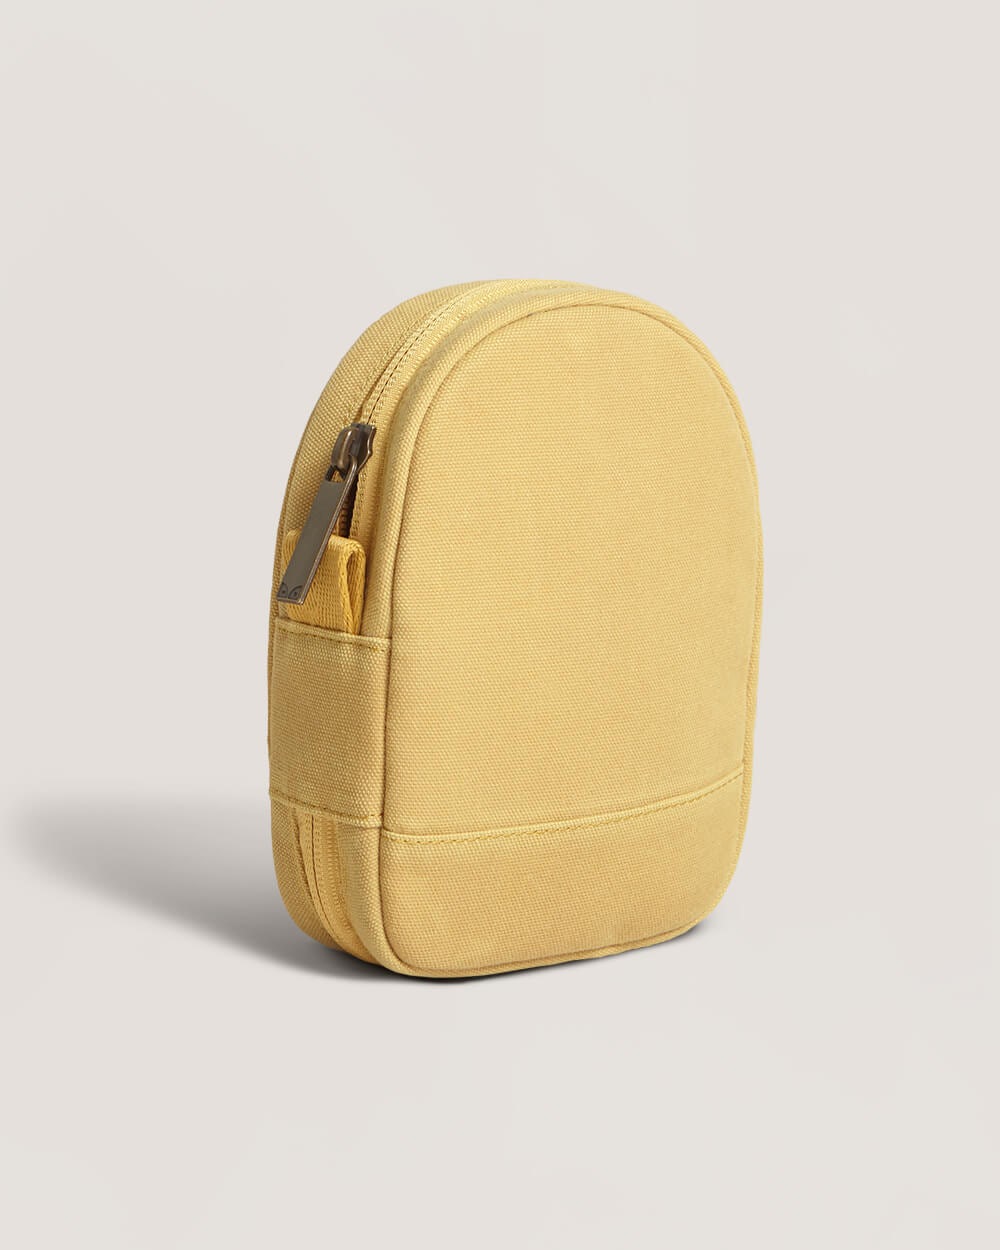 The Pouch - Dandelion Yellow